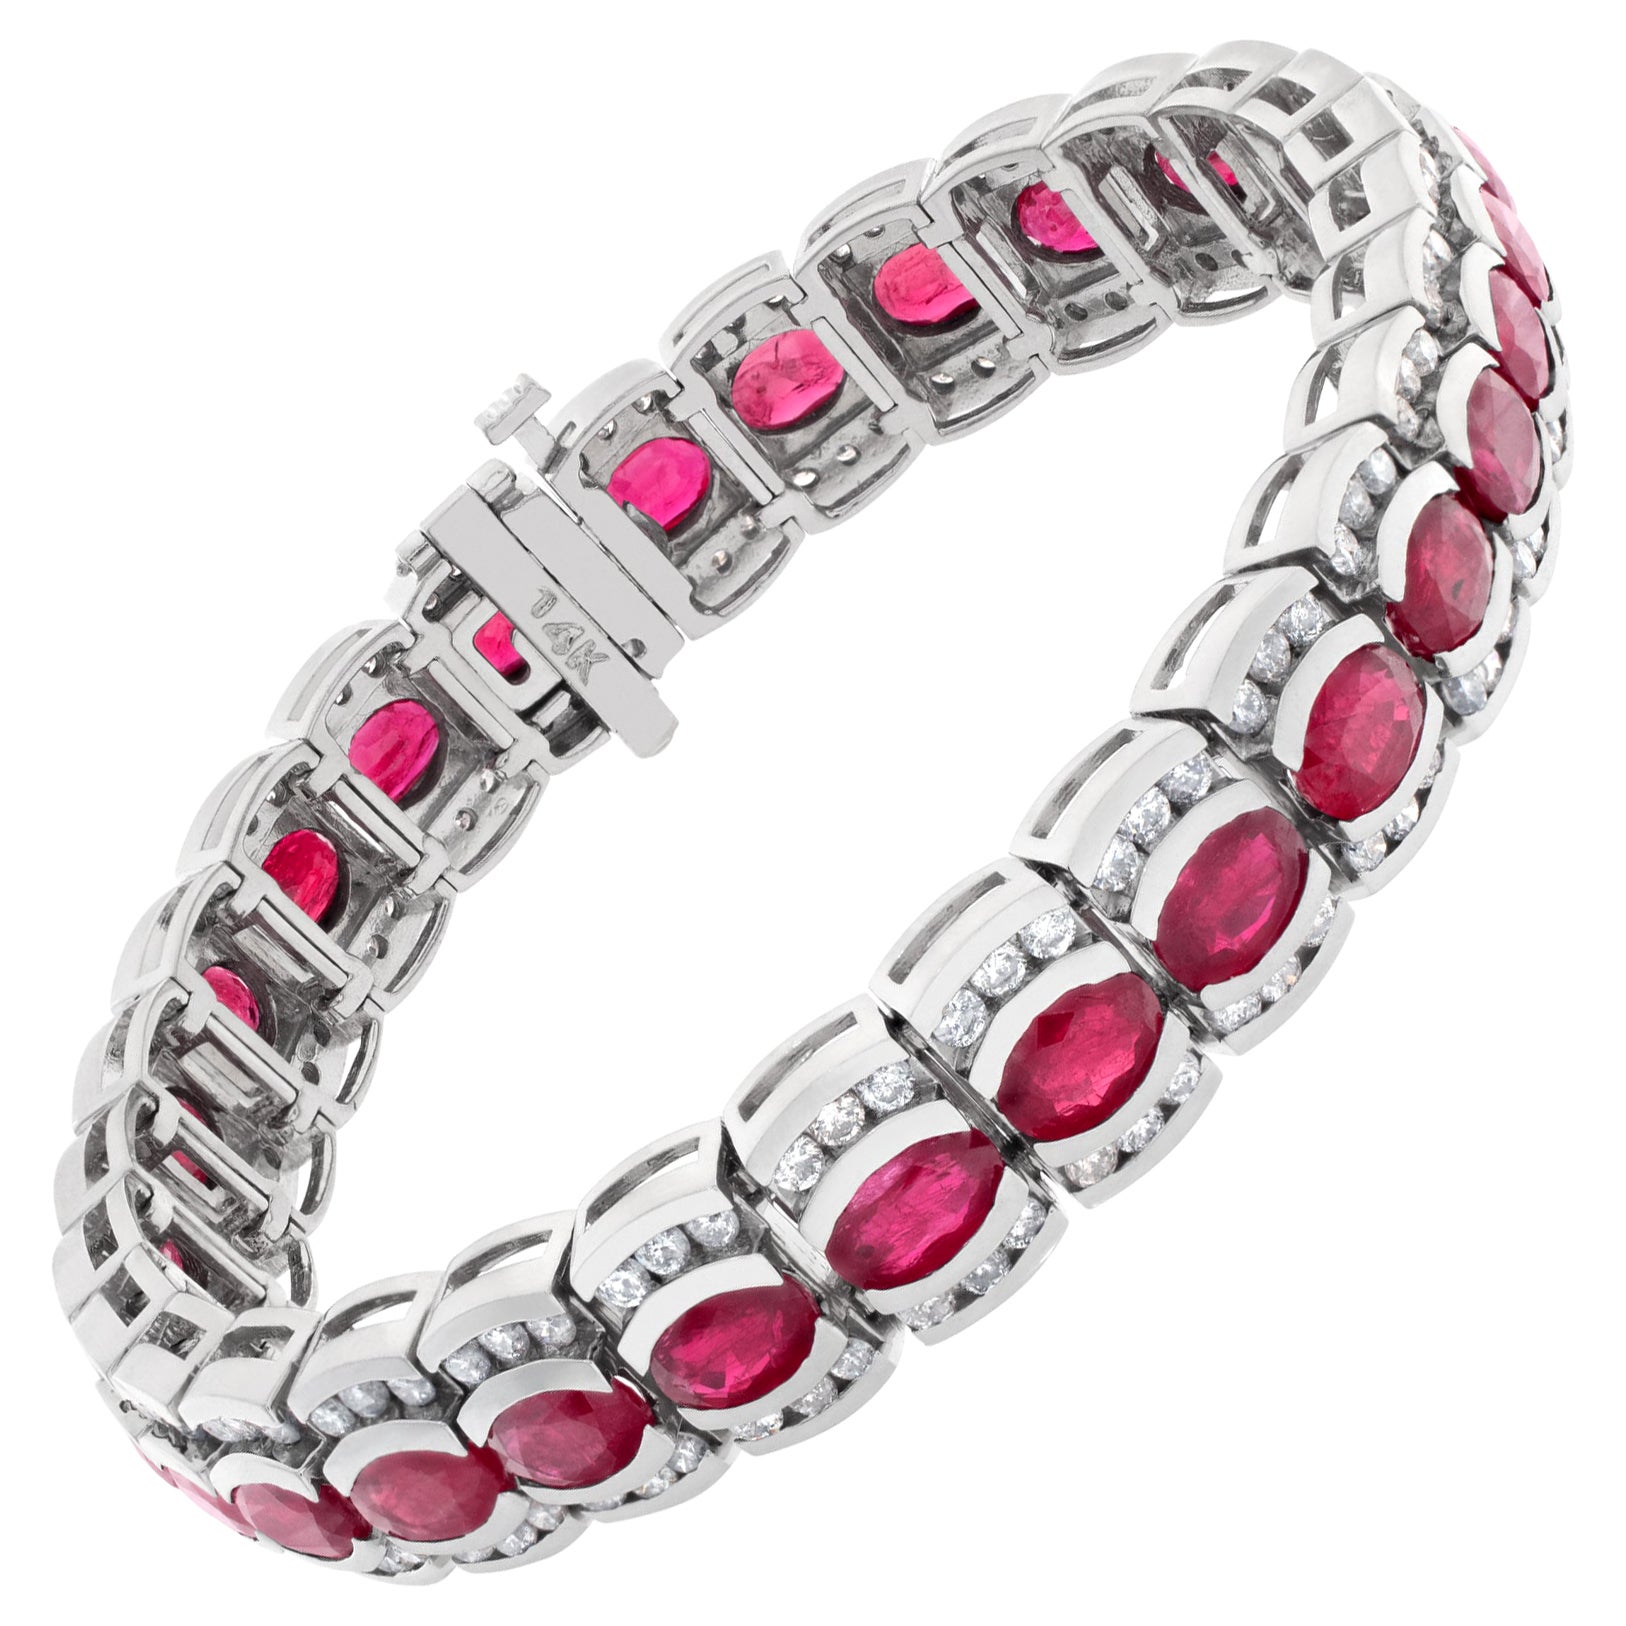 Line Bracelet in 14k White Gold with 4 Cts in Diamonds and 17.10 Cts in Rubies